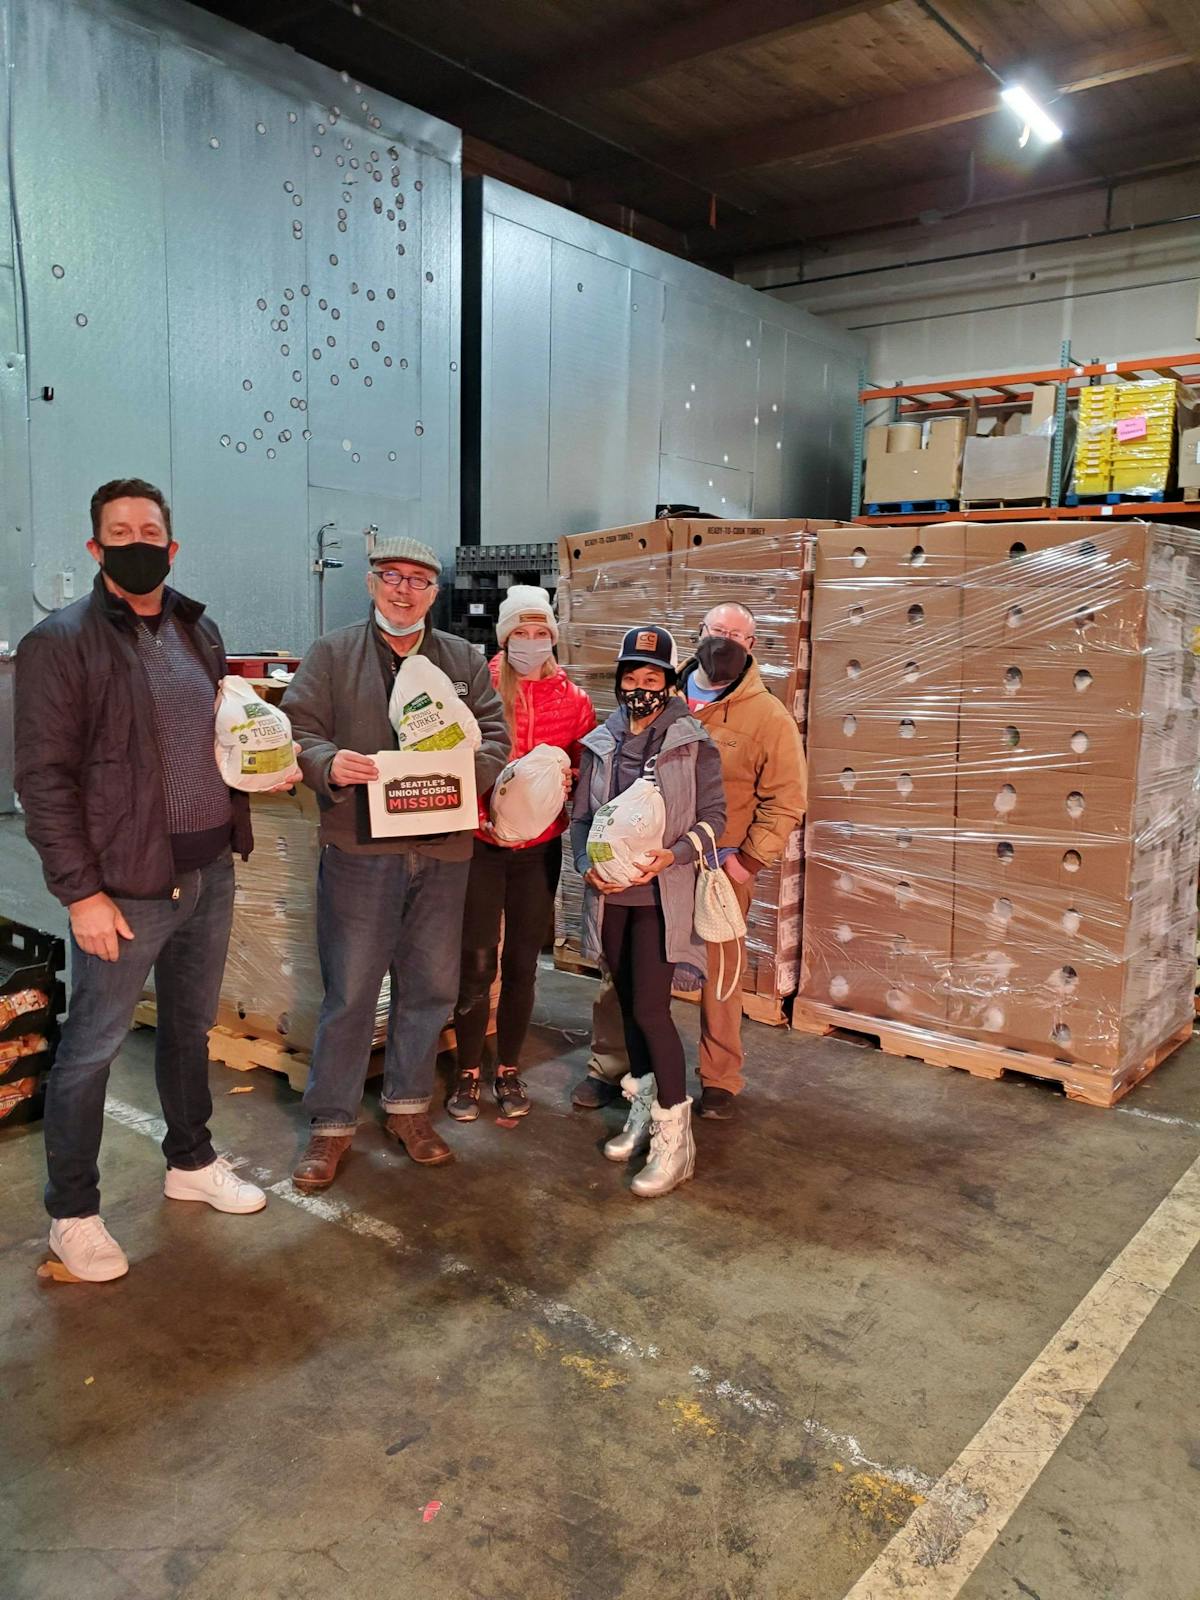 Helping Feed Families in Need